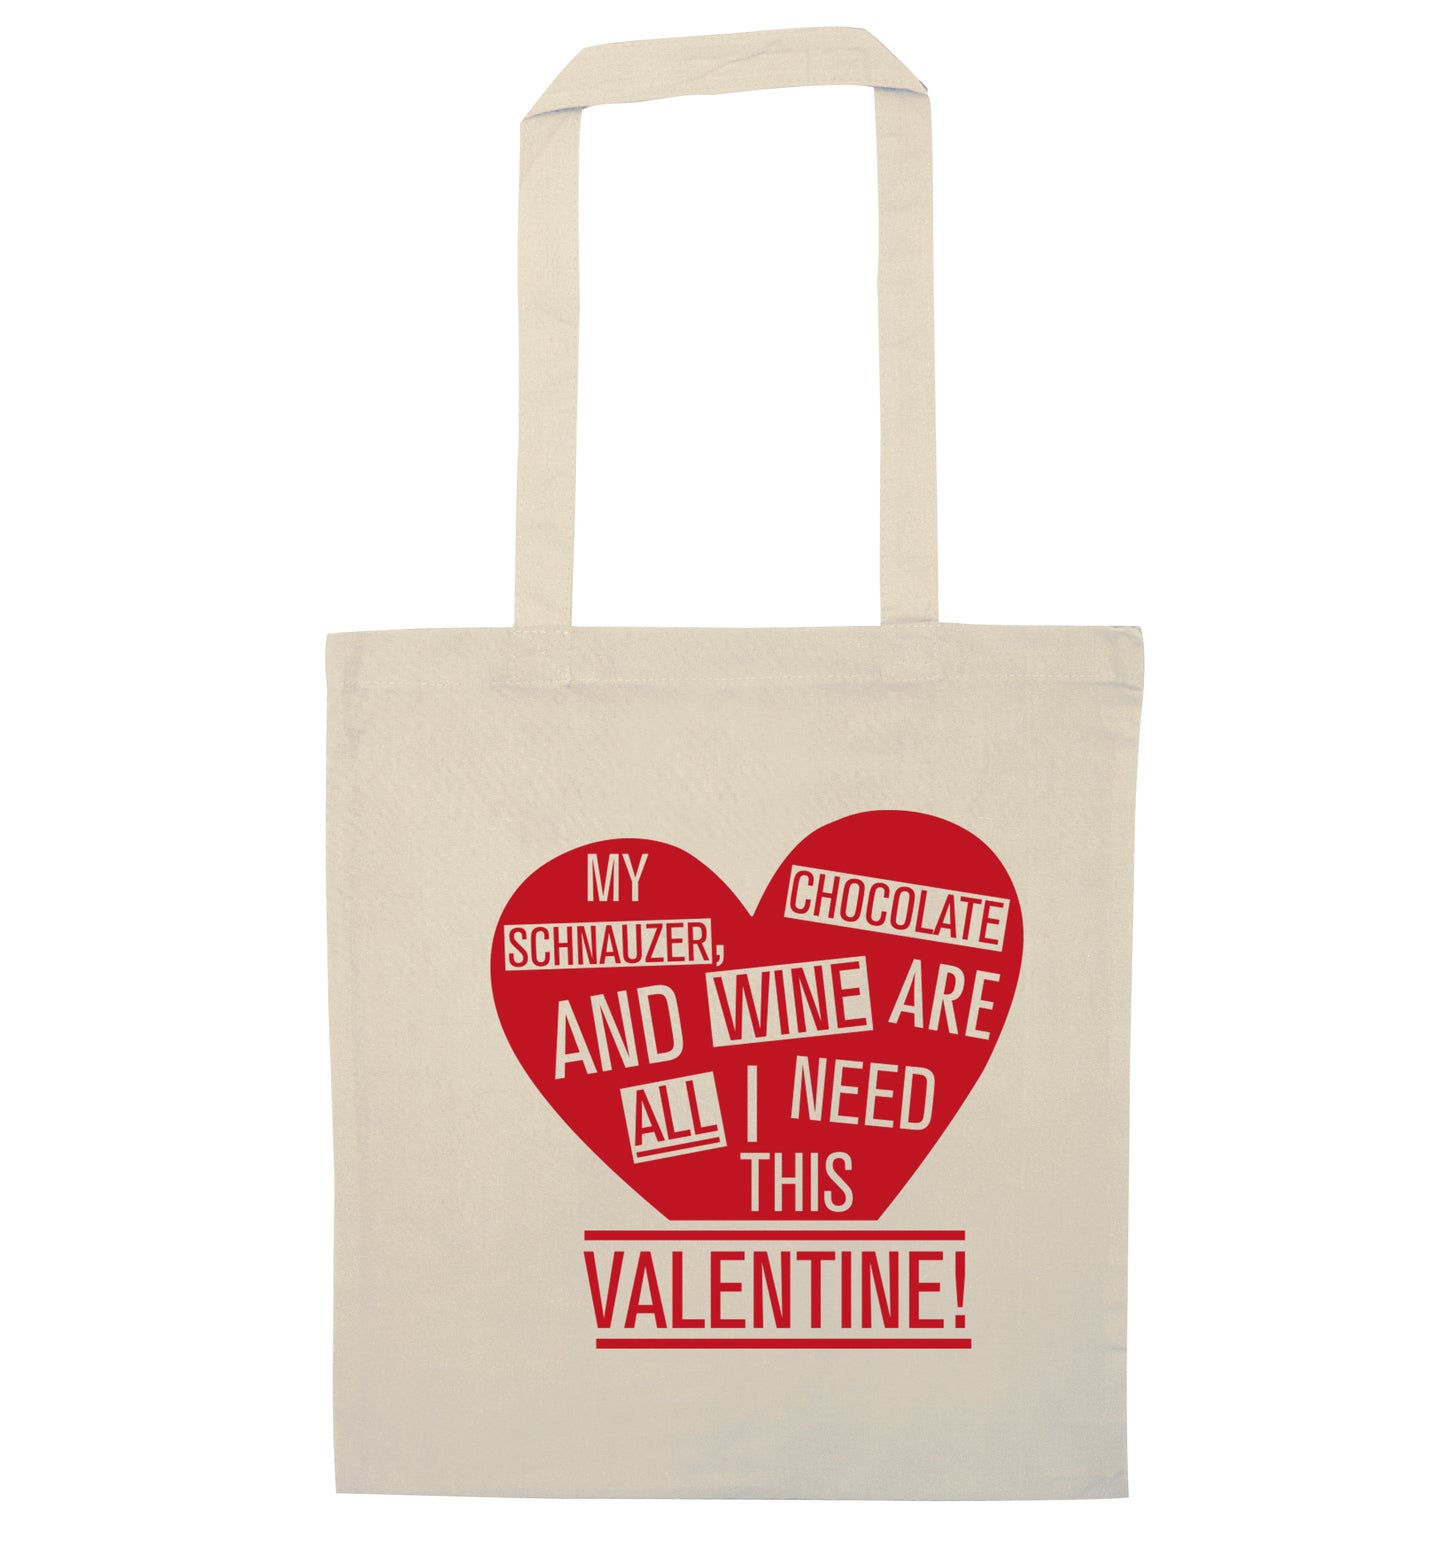 My schnauzer, chocolate and wine are all I need this valentine! natural tote bag